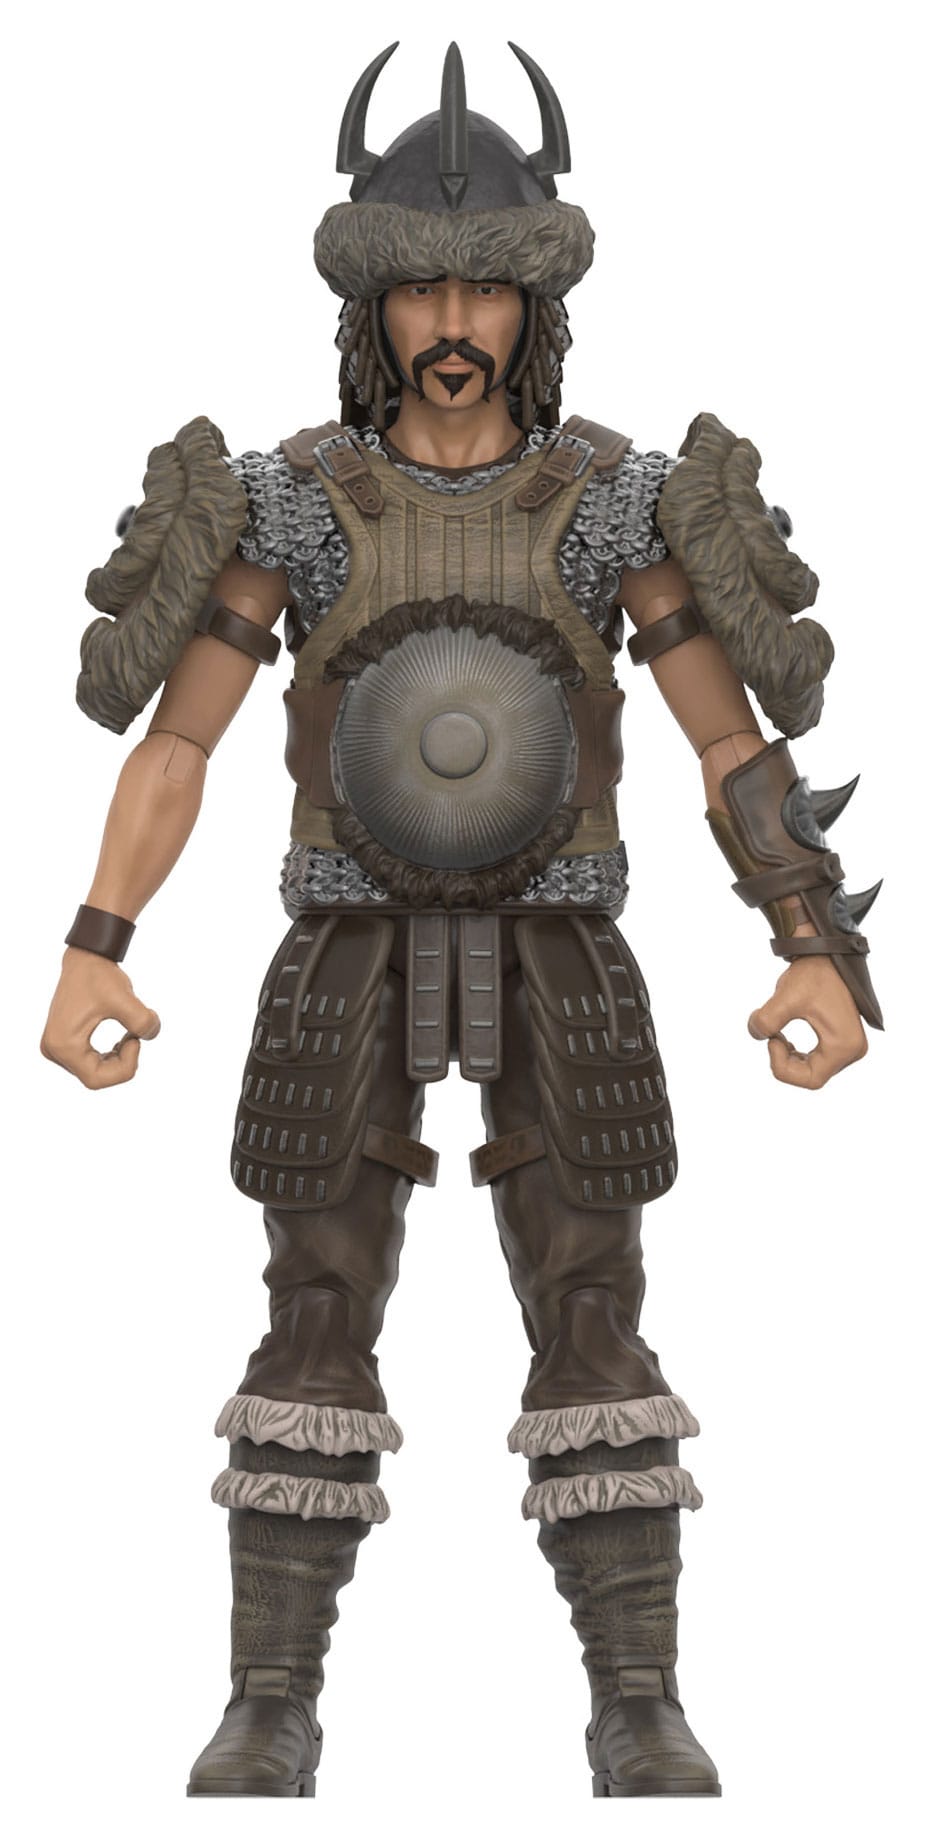 Conan the Barbarian Ultimates Action Figure Subotai (Battle of the  Mounds) 18 cm